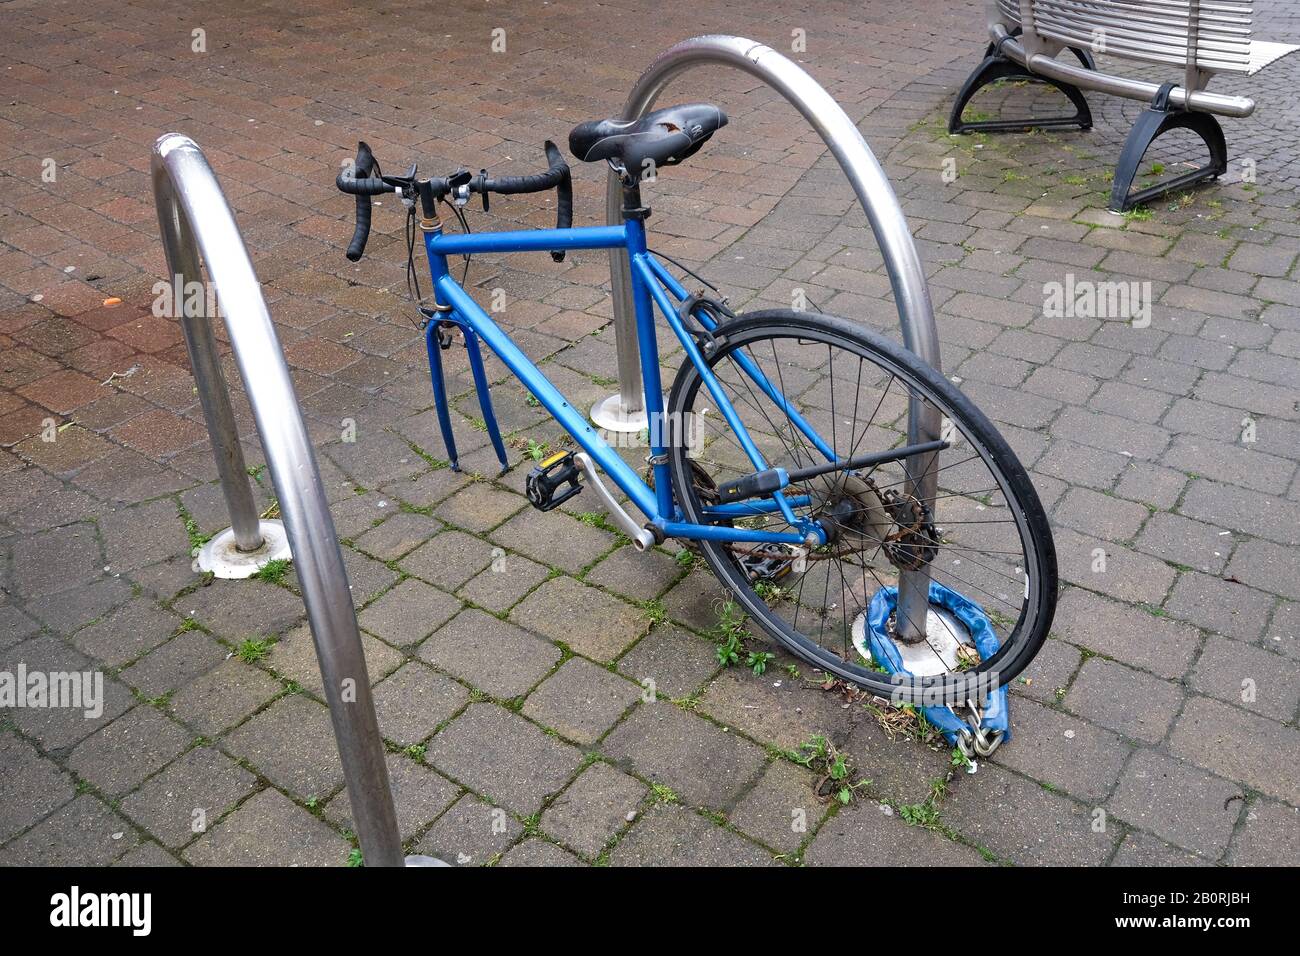 locked up bike without a front wheel Stock Photo